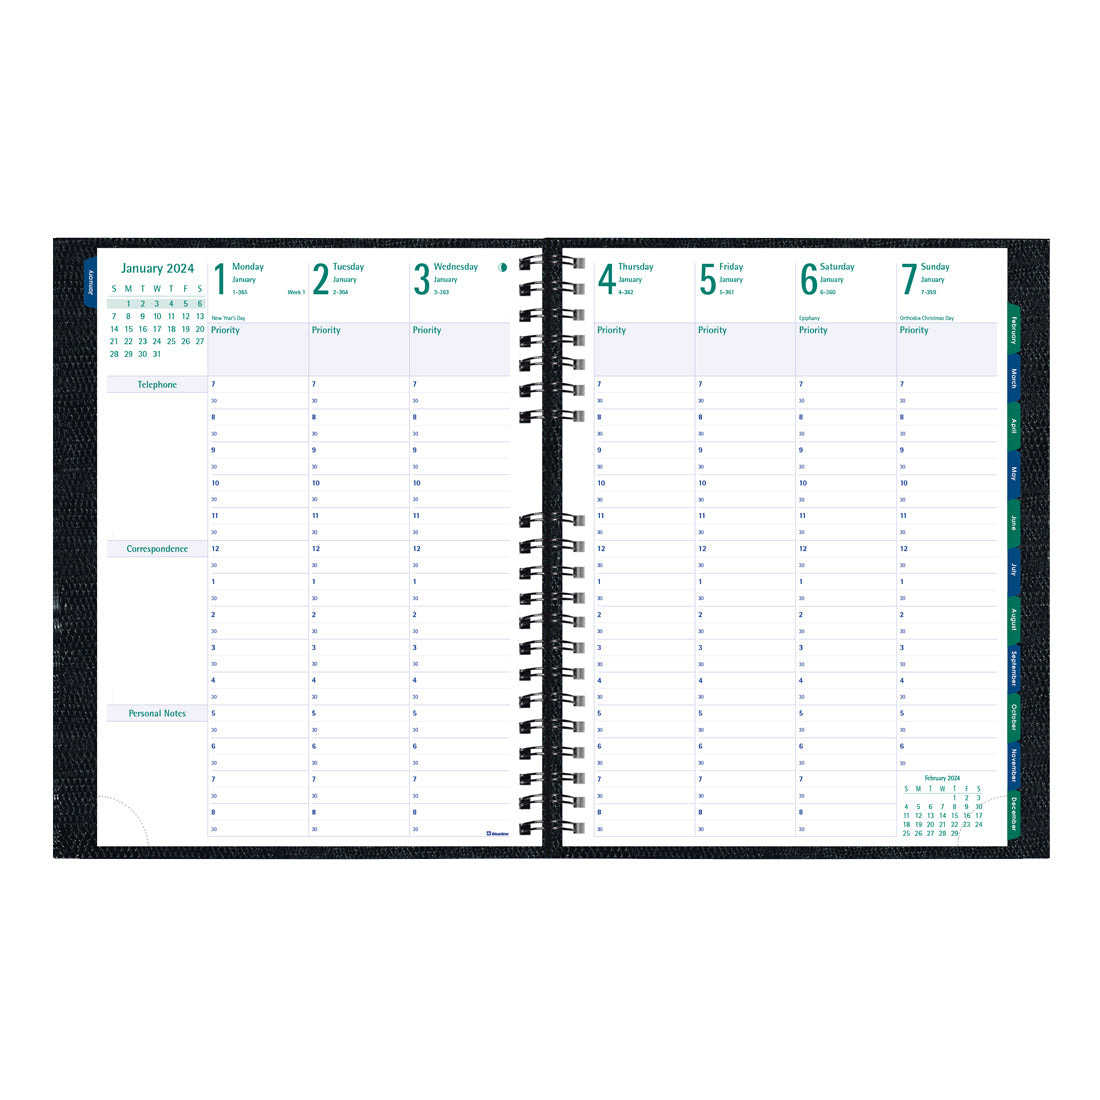 Timanager®/CoilPro Weekly Planner 2024, English, Black